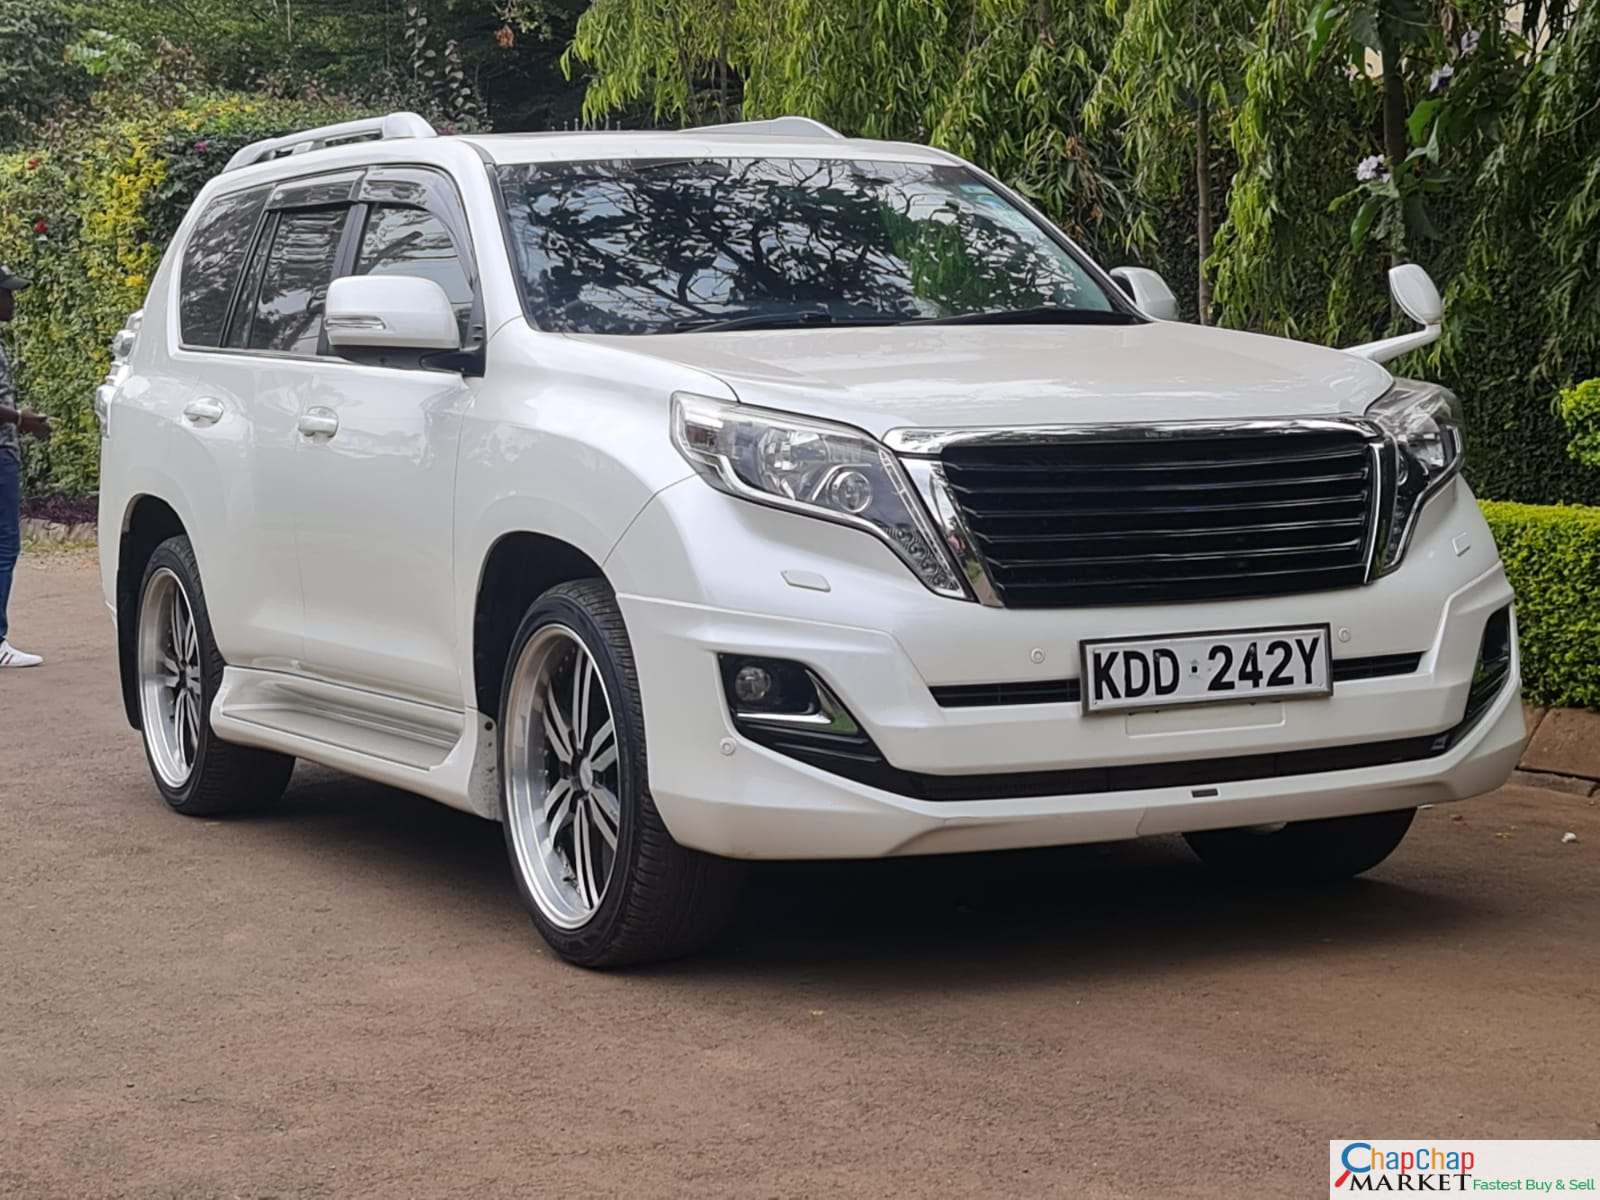 Cars Cars For Sale/Vehicles-Toyota Prado j150 for sale in Kenya with SUNROOF ðŸ”¥ You Pay 30% Deposit Trade in OK EXCLUSIVE 9